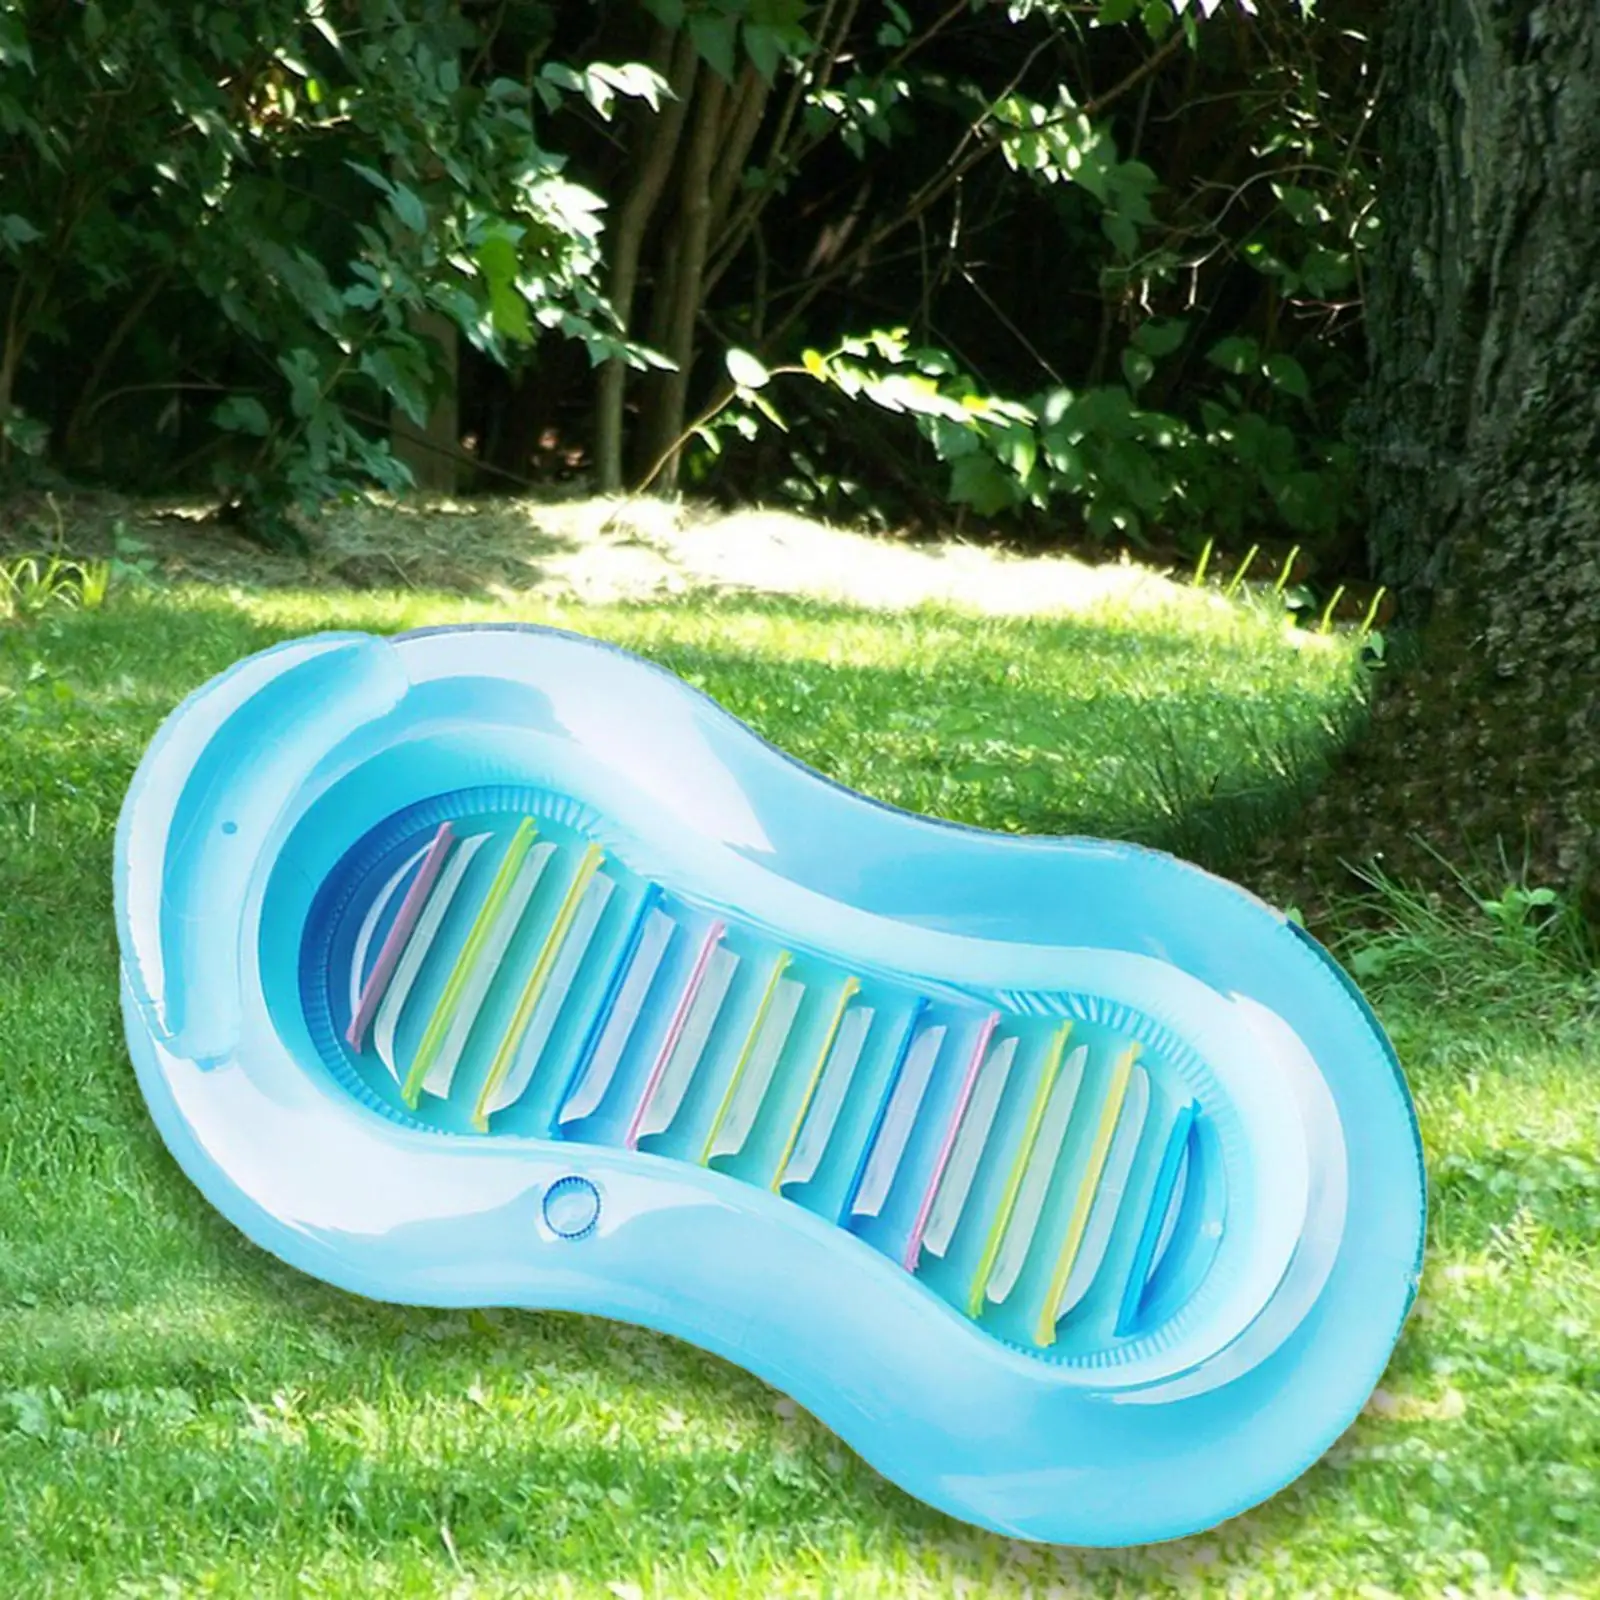 Inflatable Floats Water Mattress Mat Pool Floats Lounge for Pool